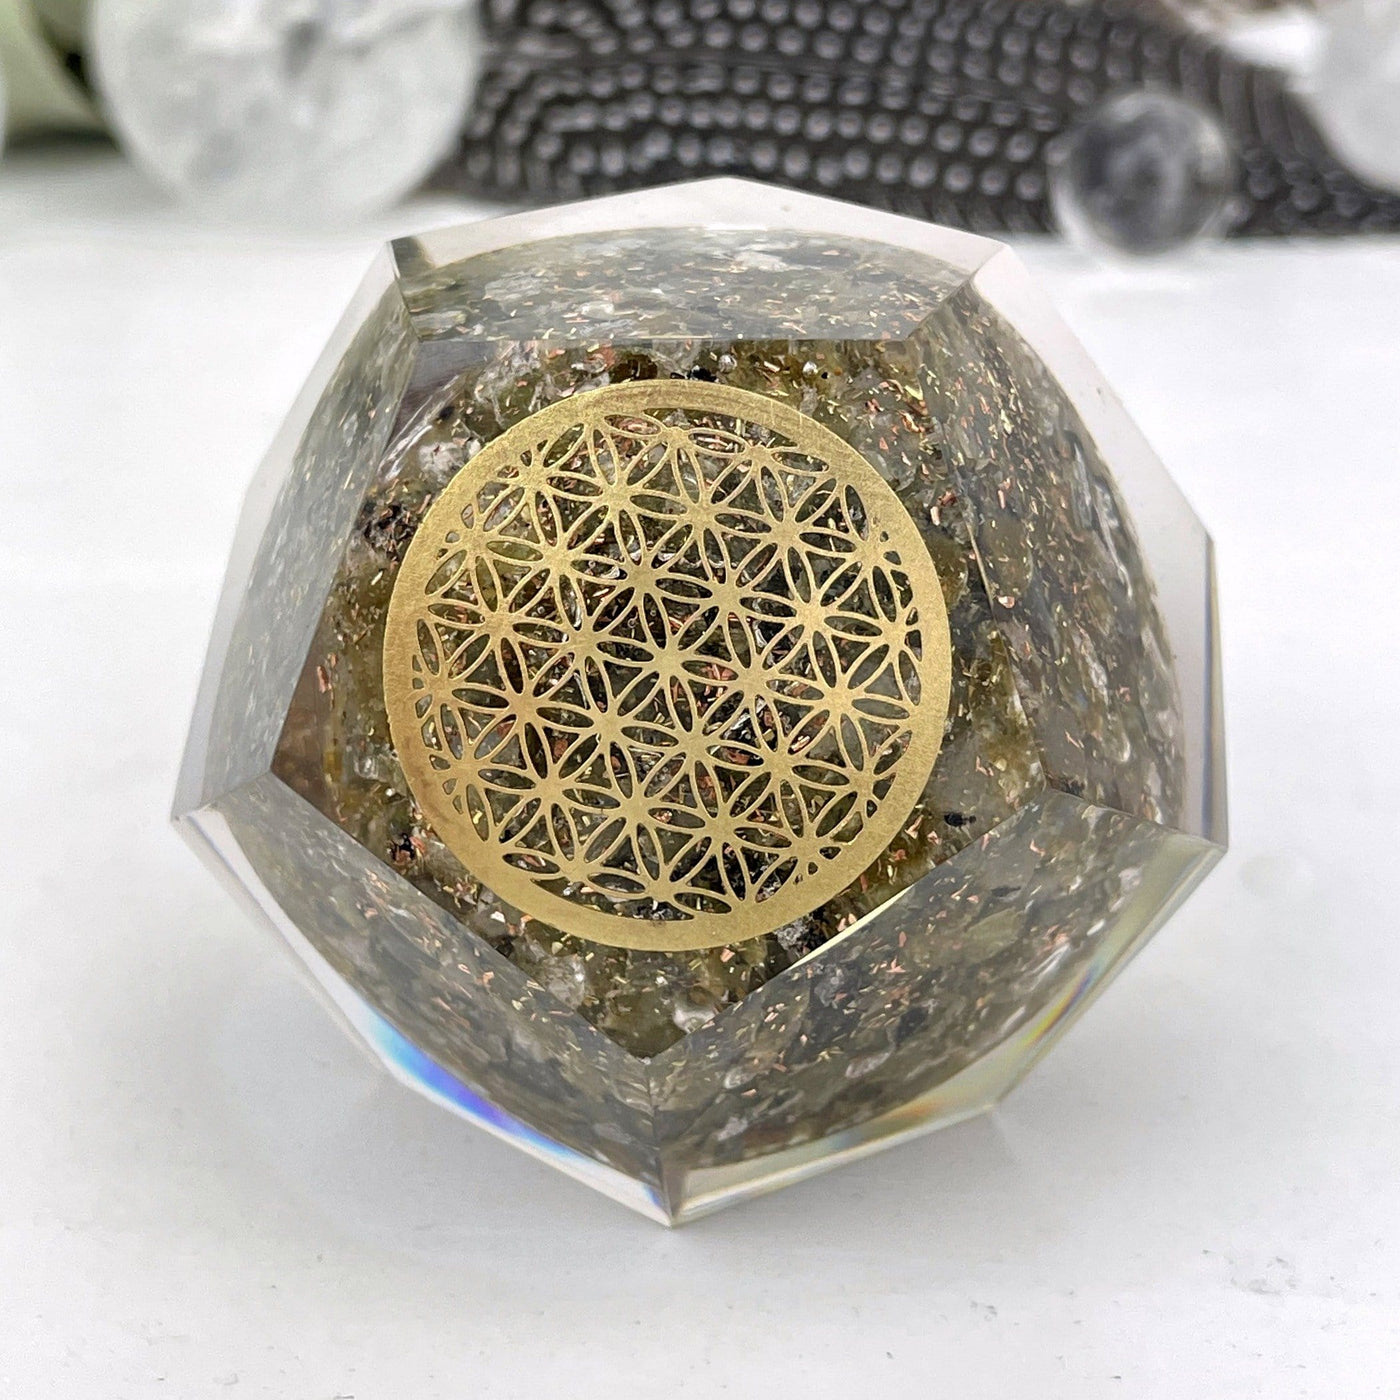 Orgone Energy - Labradorite with Gold Flower of Life Grid - Dodecahedron shaped-- close shot view of dodecahedron on table.